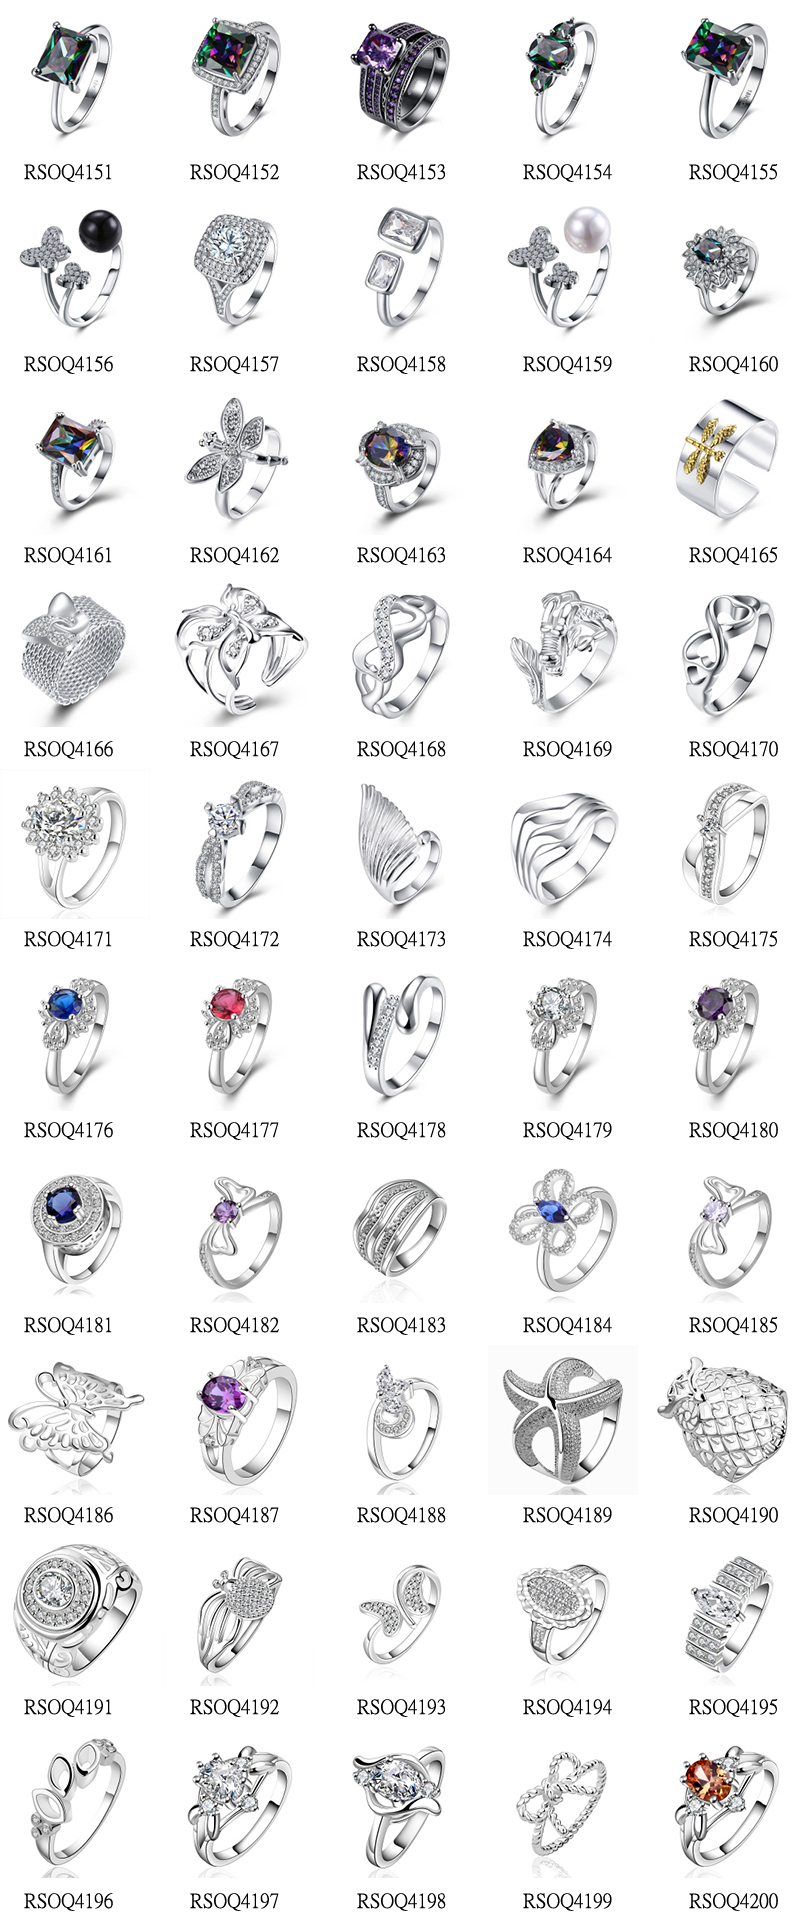 450 Skull Ring, Animal-Shaped Ring and Awesome Vintage Ring Designs 